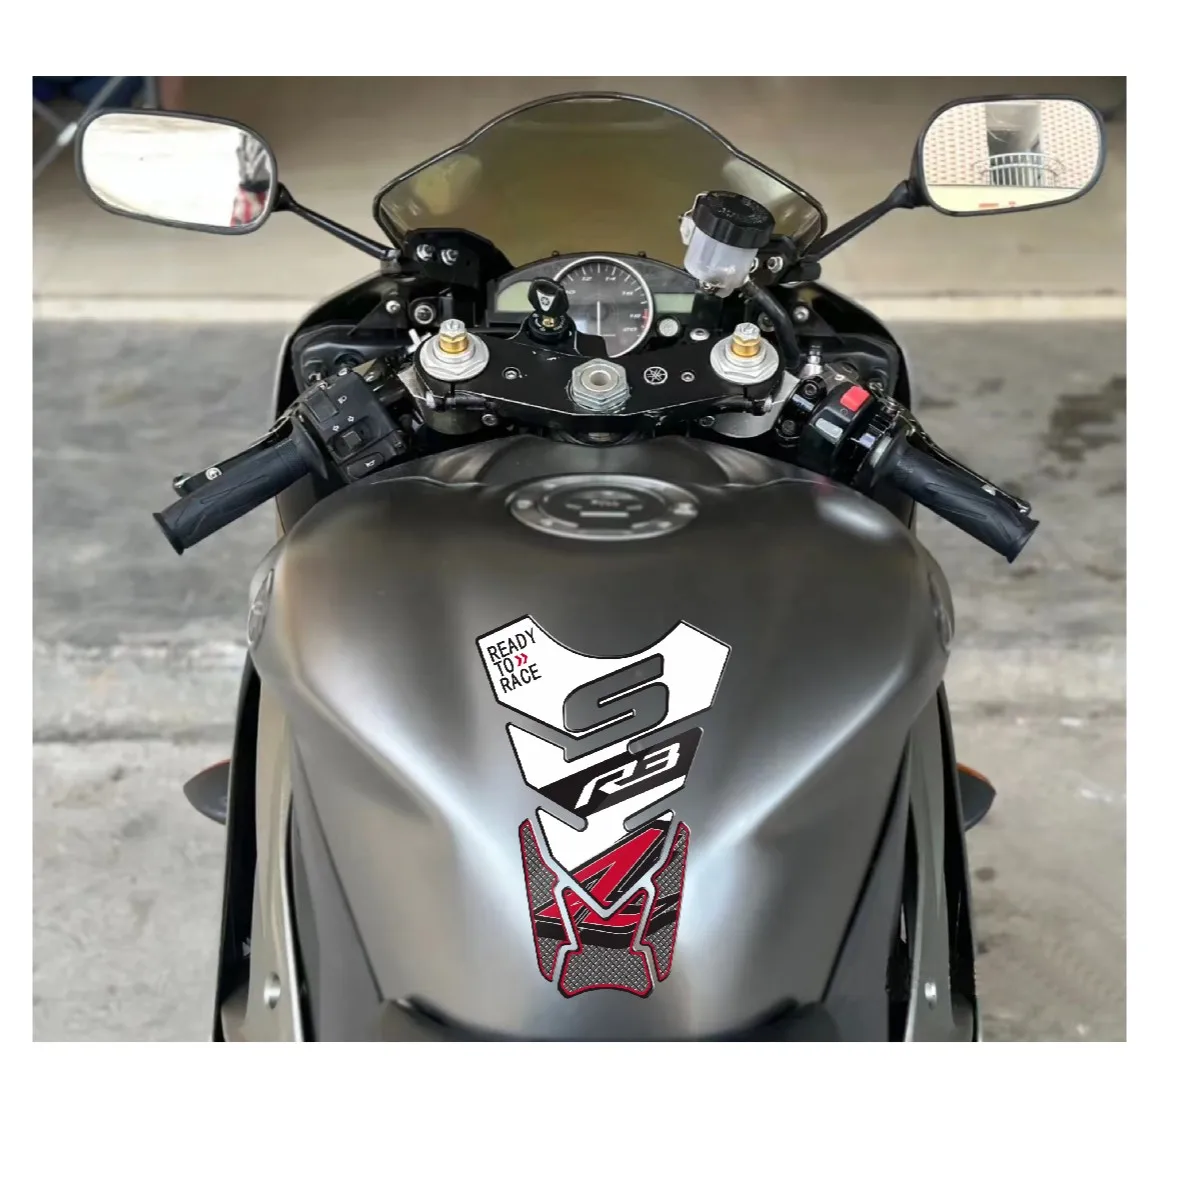 Motorcycle Tank Sticker 3D Rubber Gas Fuel Oil Tank Pad Protector Cover Sticker Decals For YAMAHA YZF-R3 R3 R 3